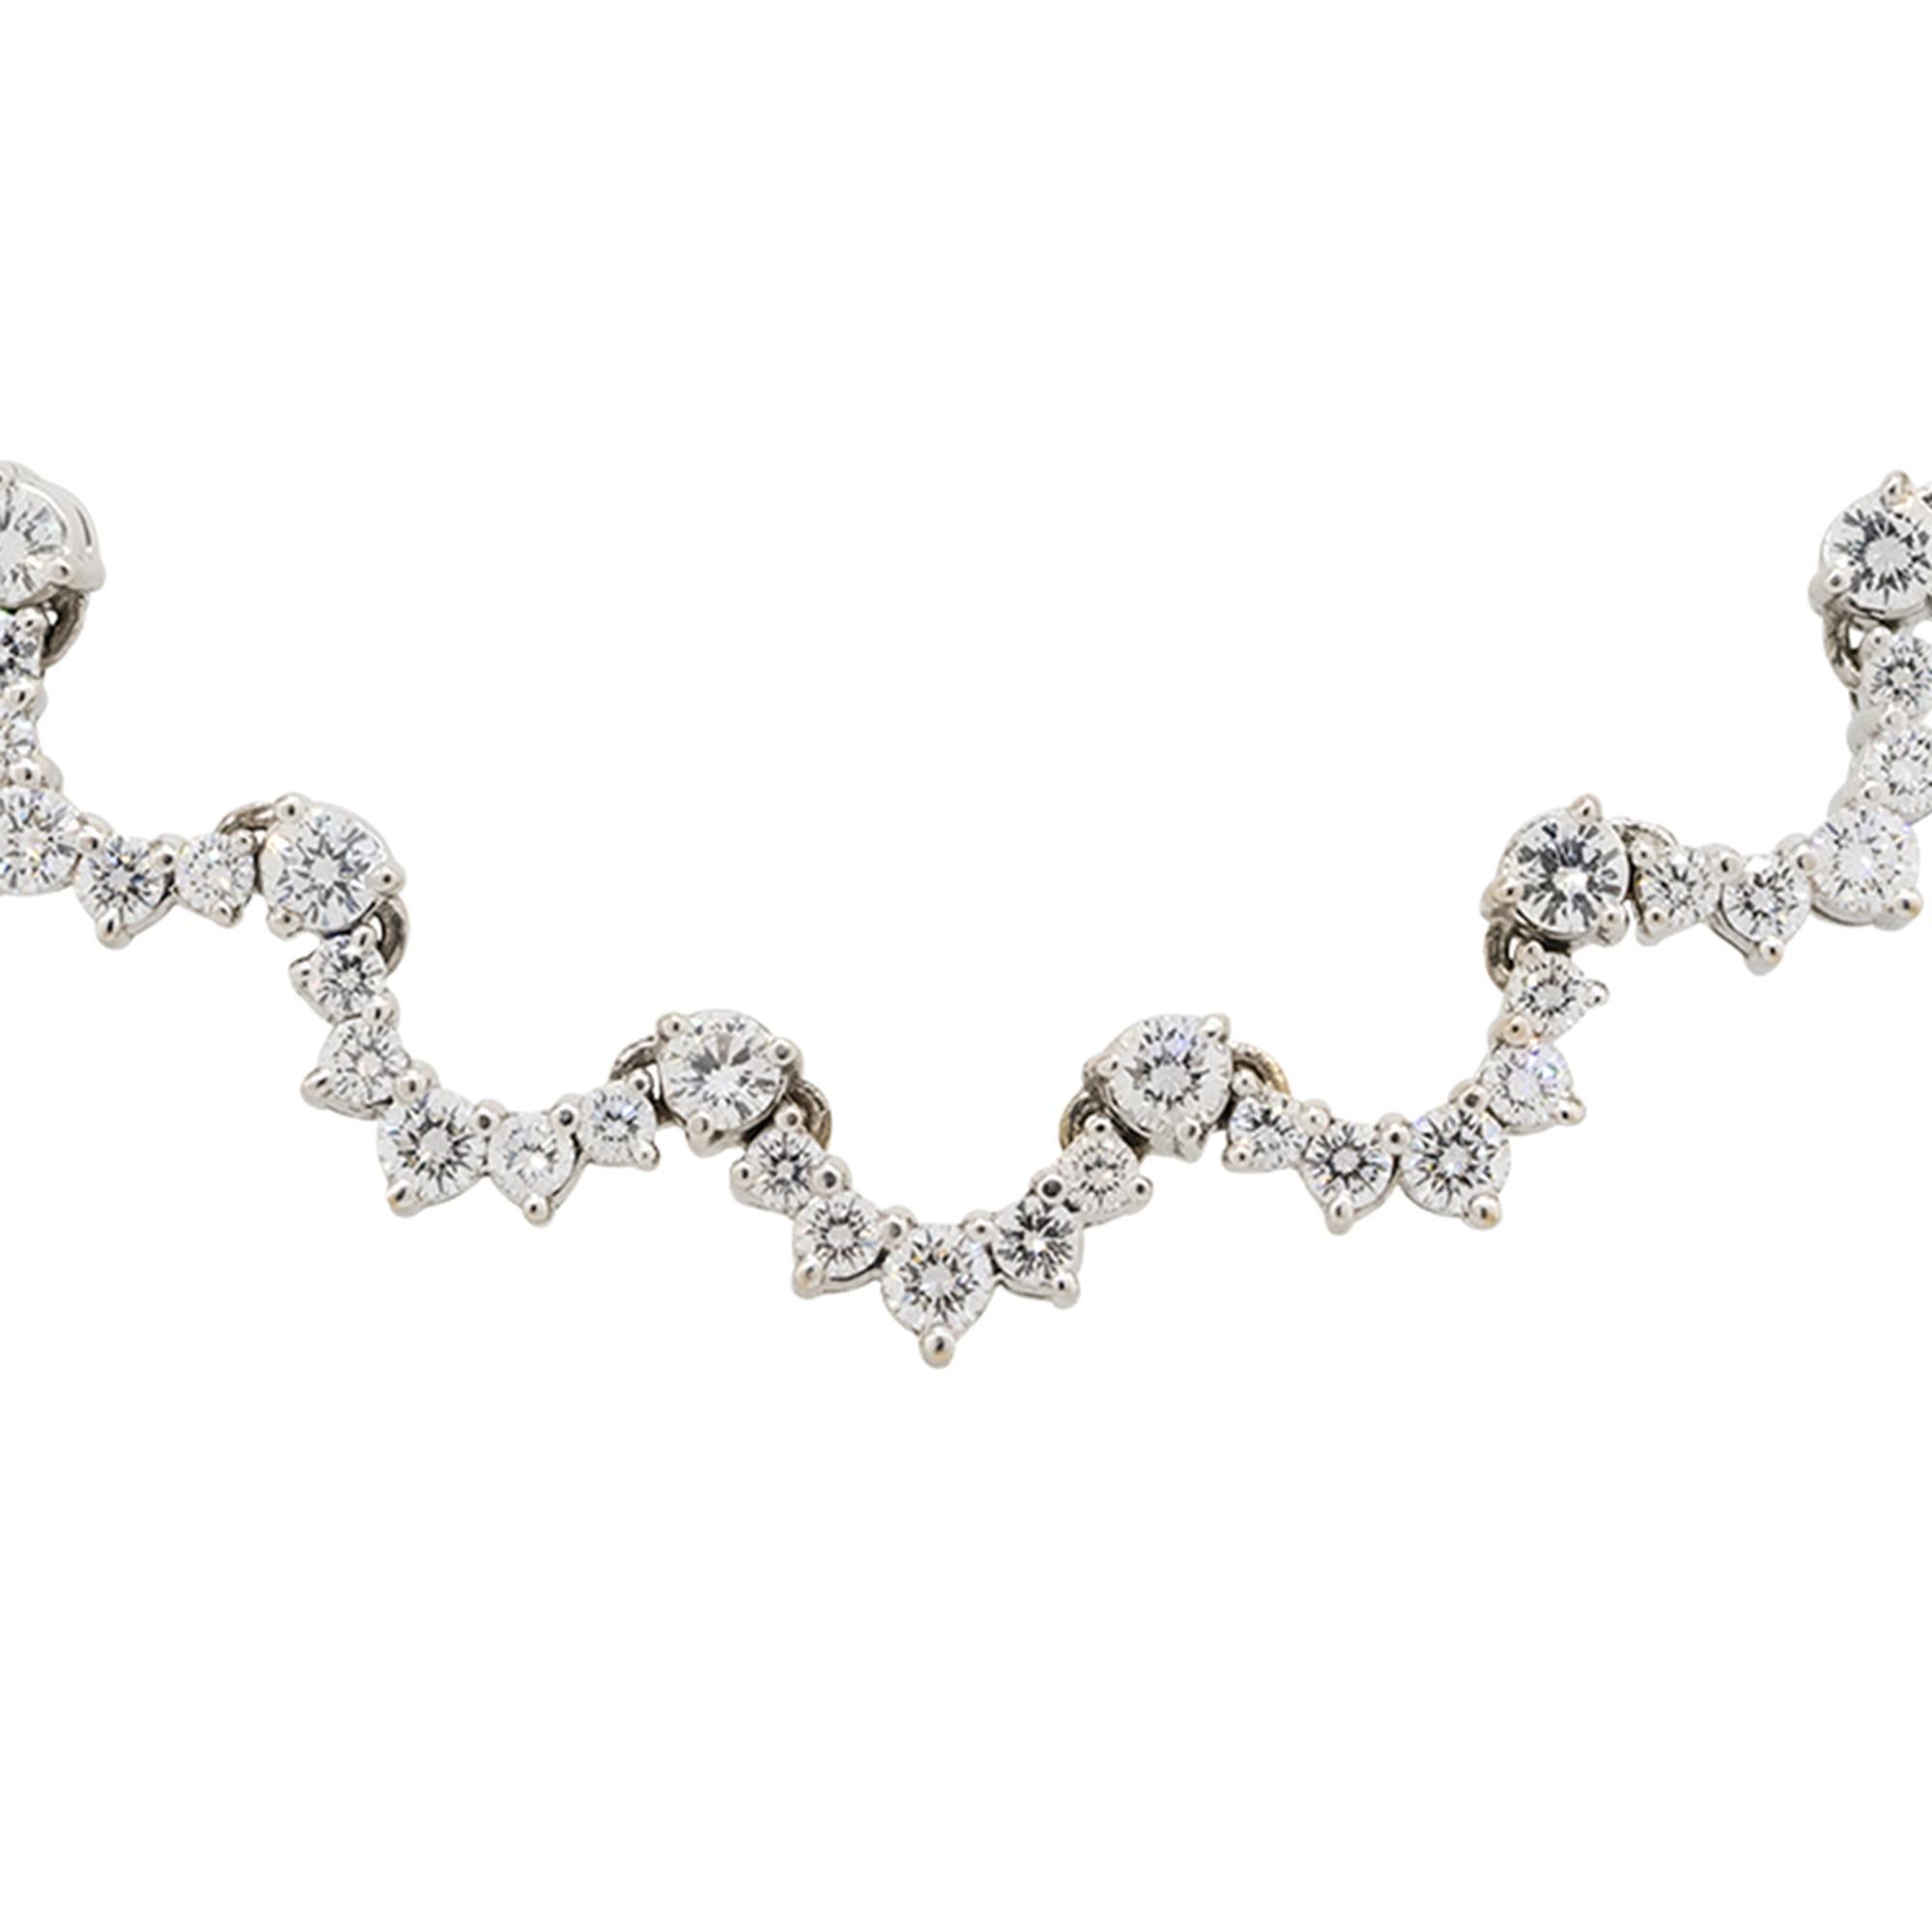 Material: 14k White gold 
Diamond Details: Approx. 10.40ctw of round cut Diamonds. Diamonds are G/H in color and VS in clarity
Measurements: Necklace measures 16